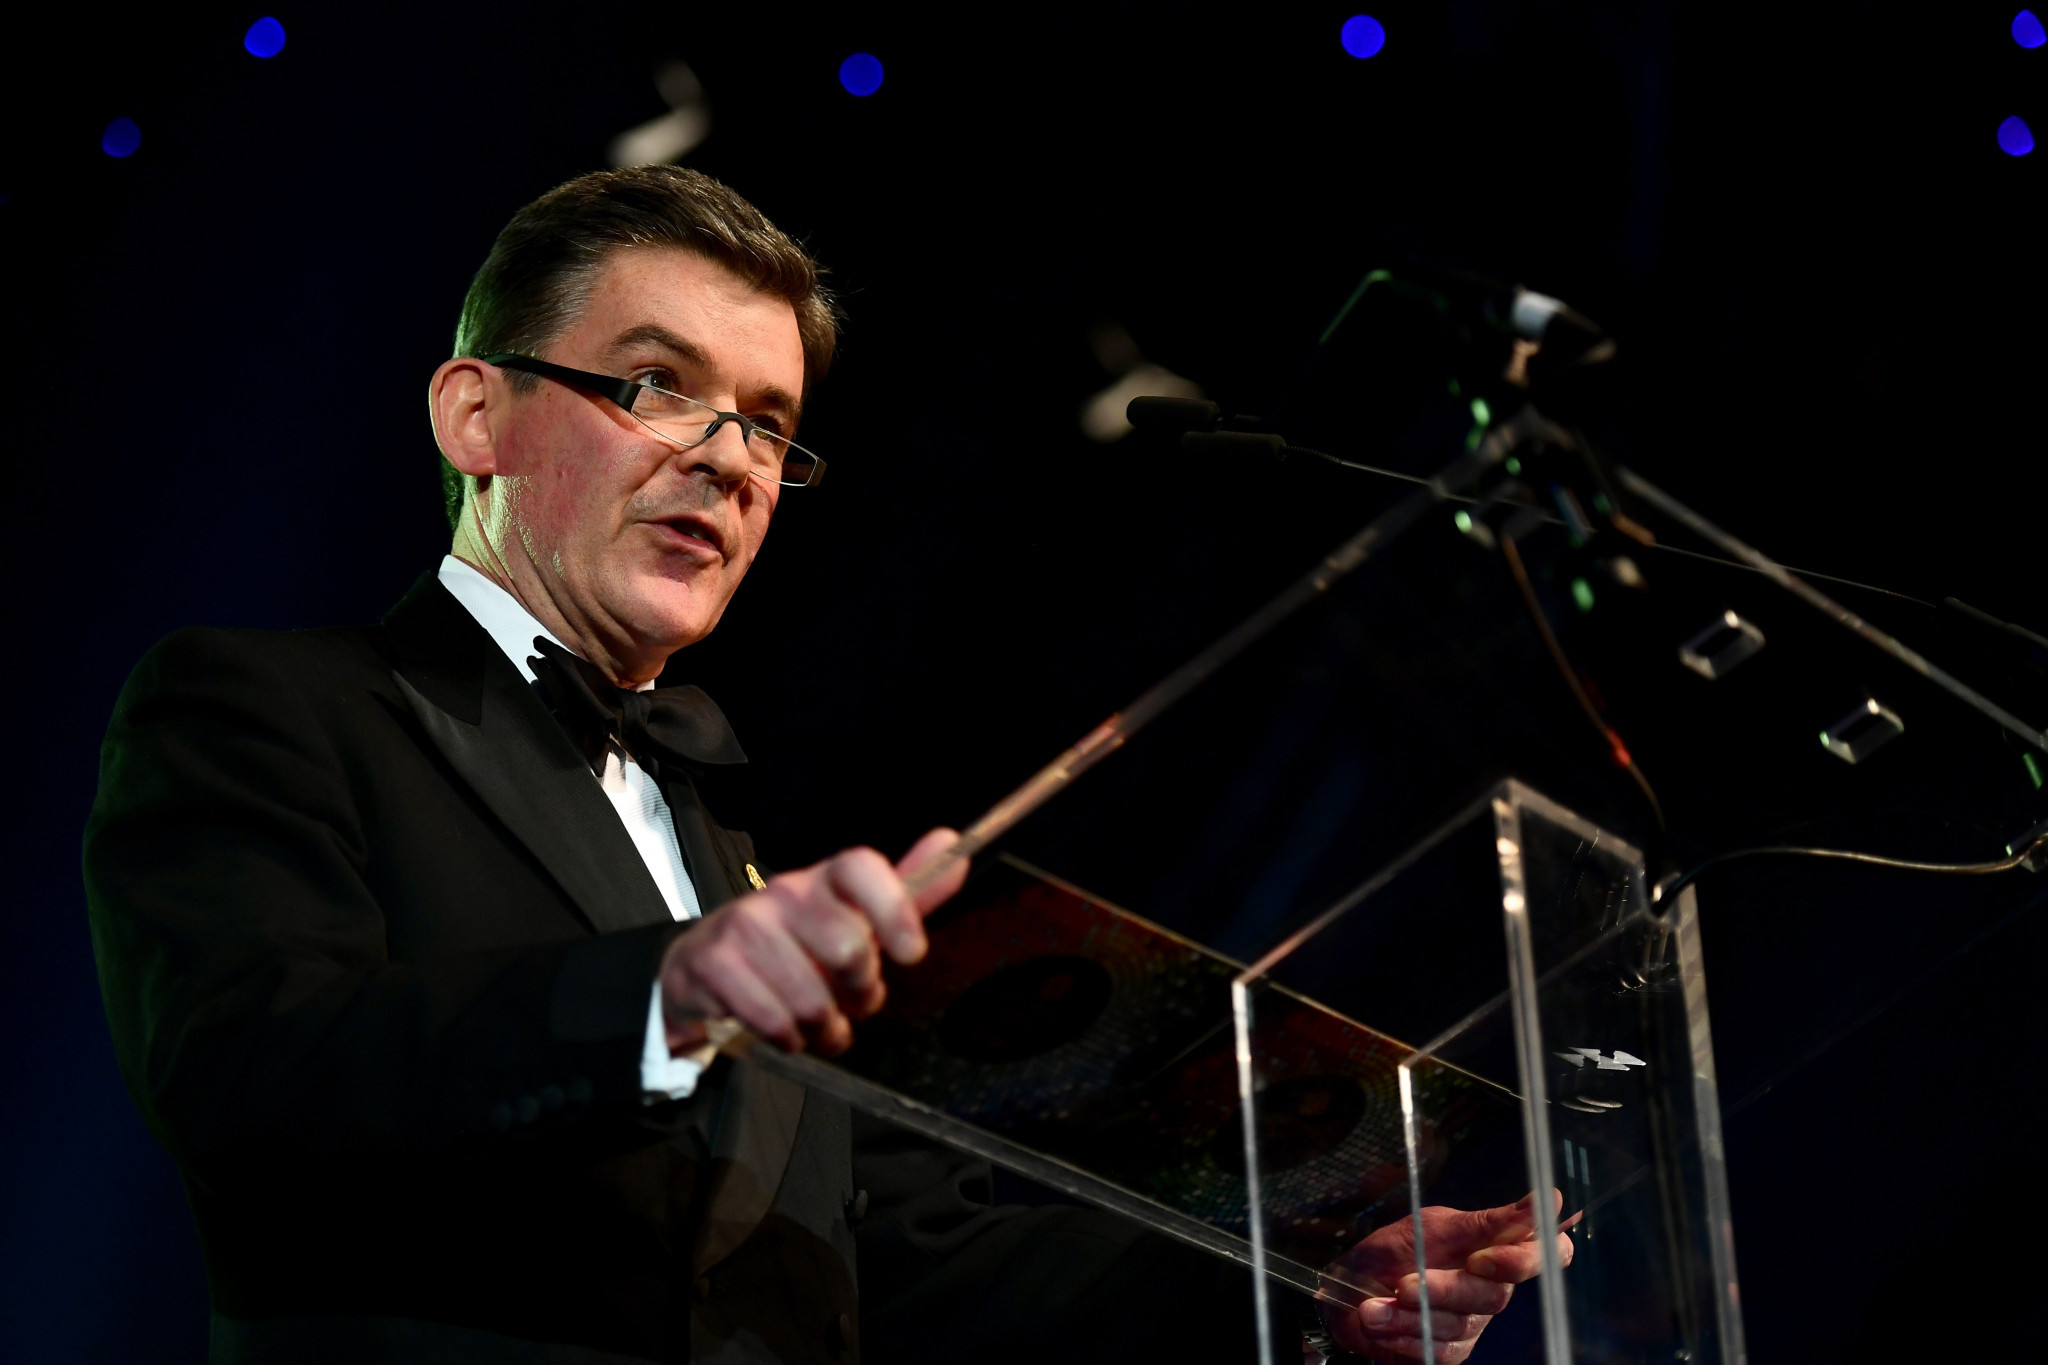 Sir Hugh Robertson has welcomed the latest appointments ©Getty Images